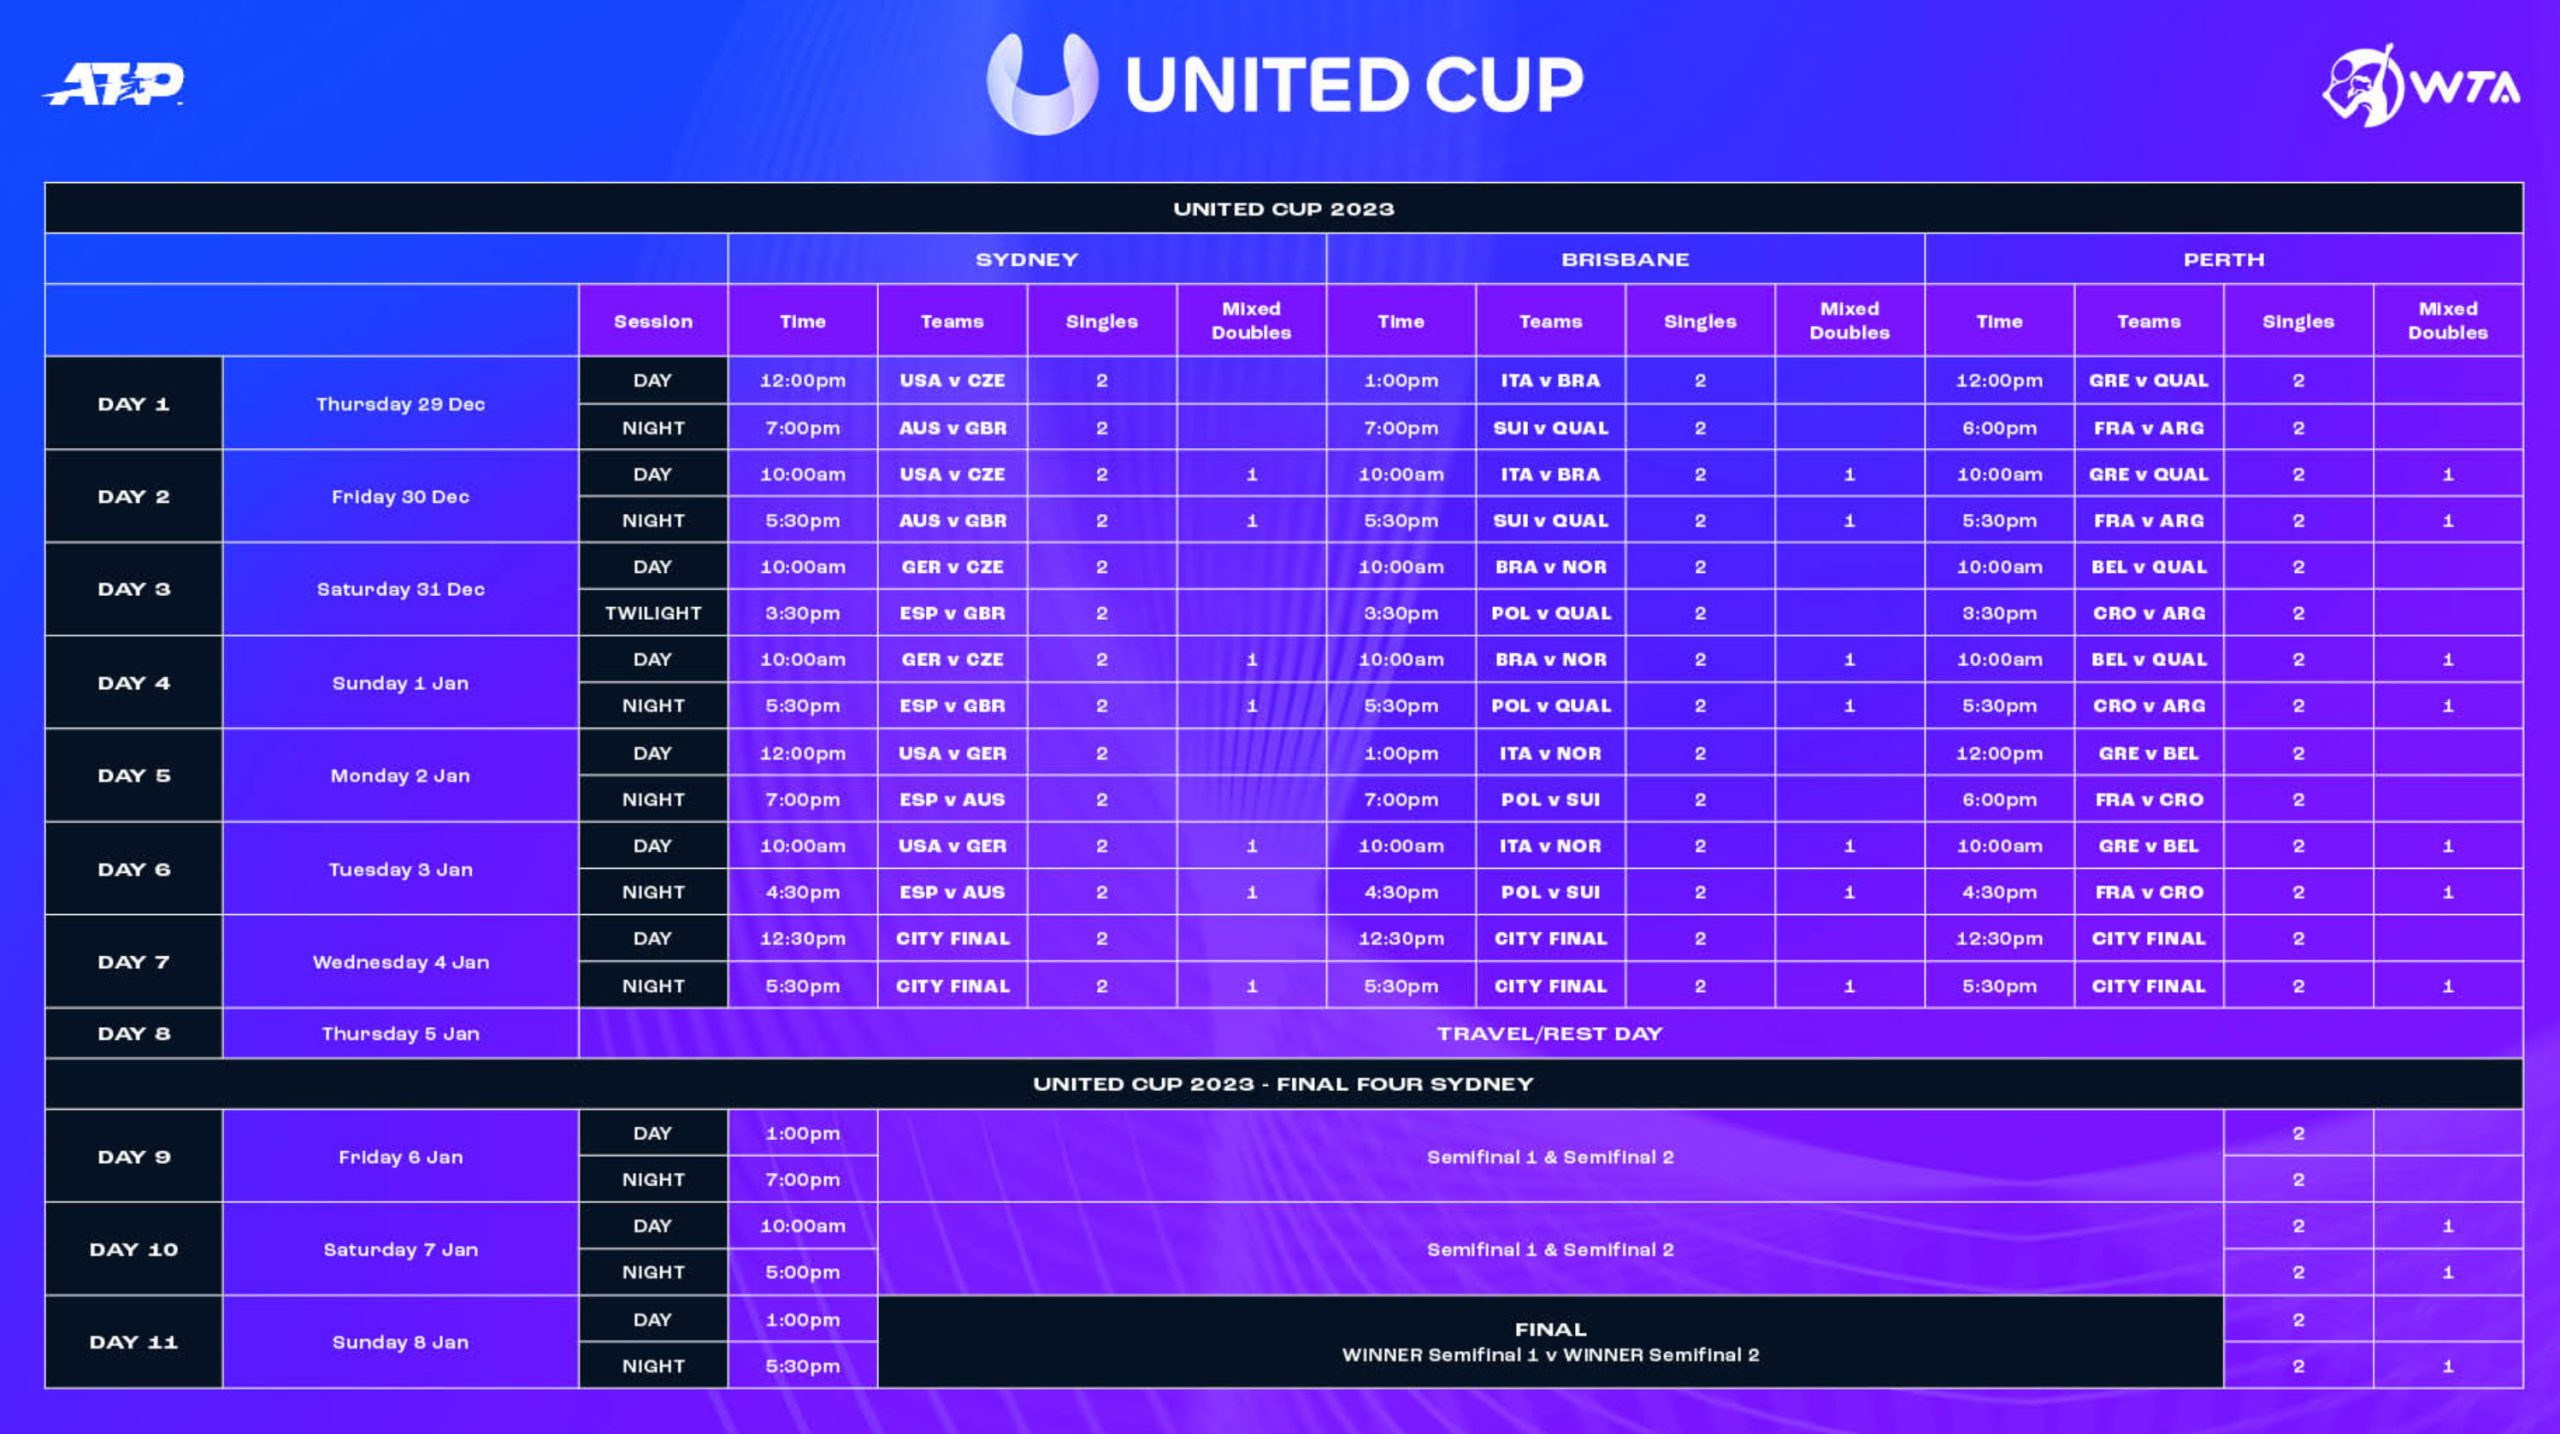 United Cup schedule announced with Nadal, Swiatek the top players